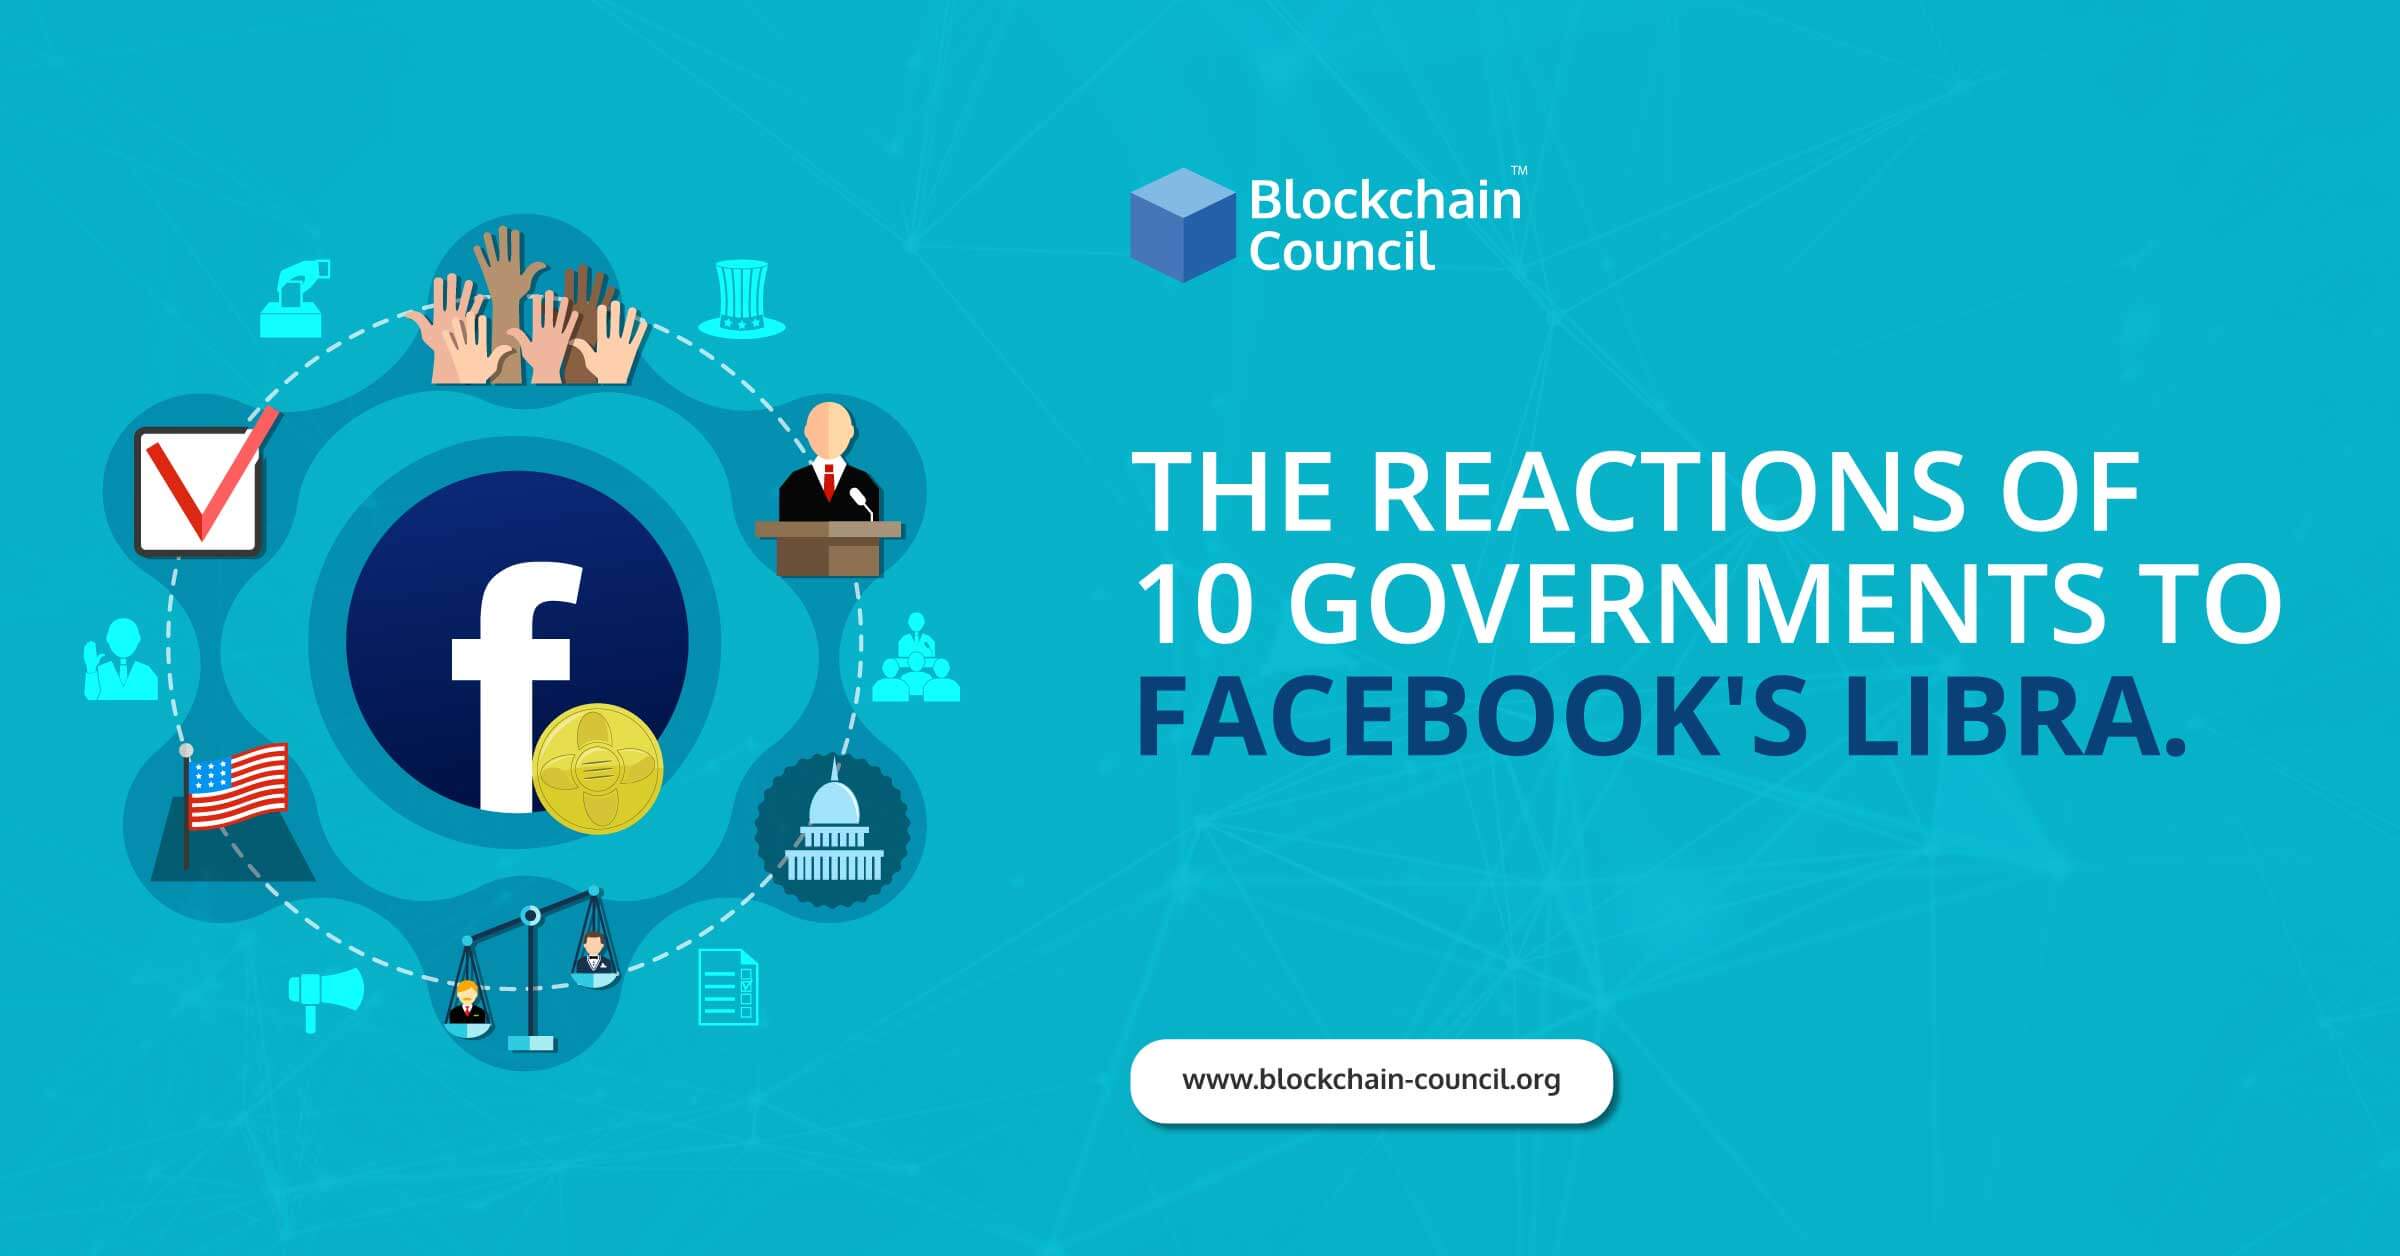 The Reactions of 10 Governments to Facebook’s Libra